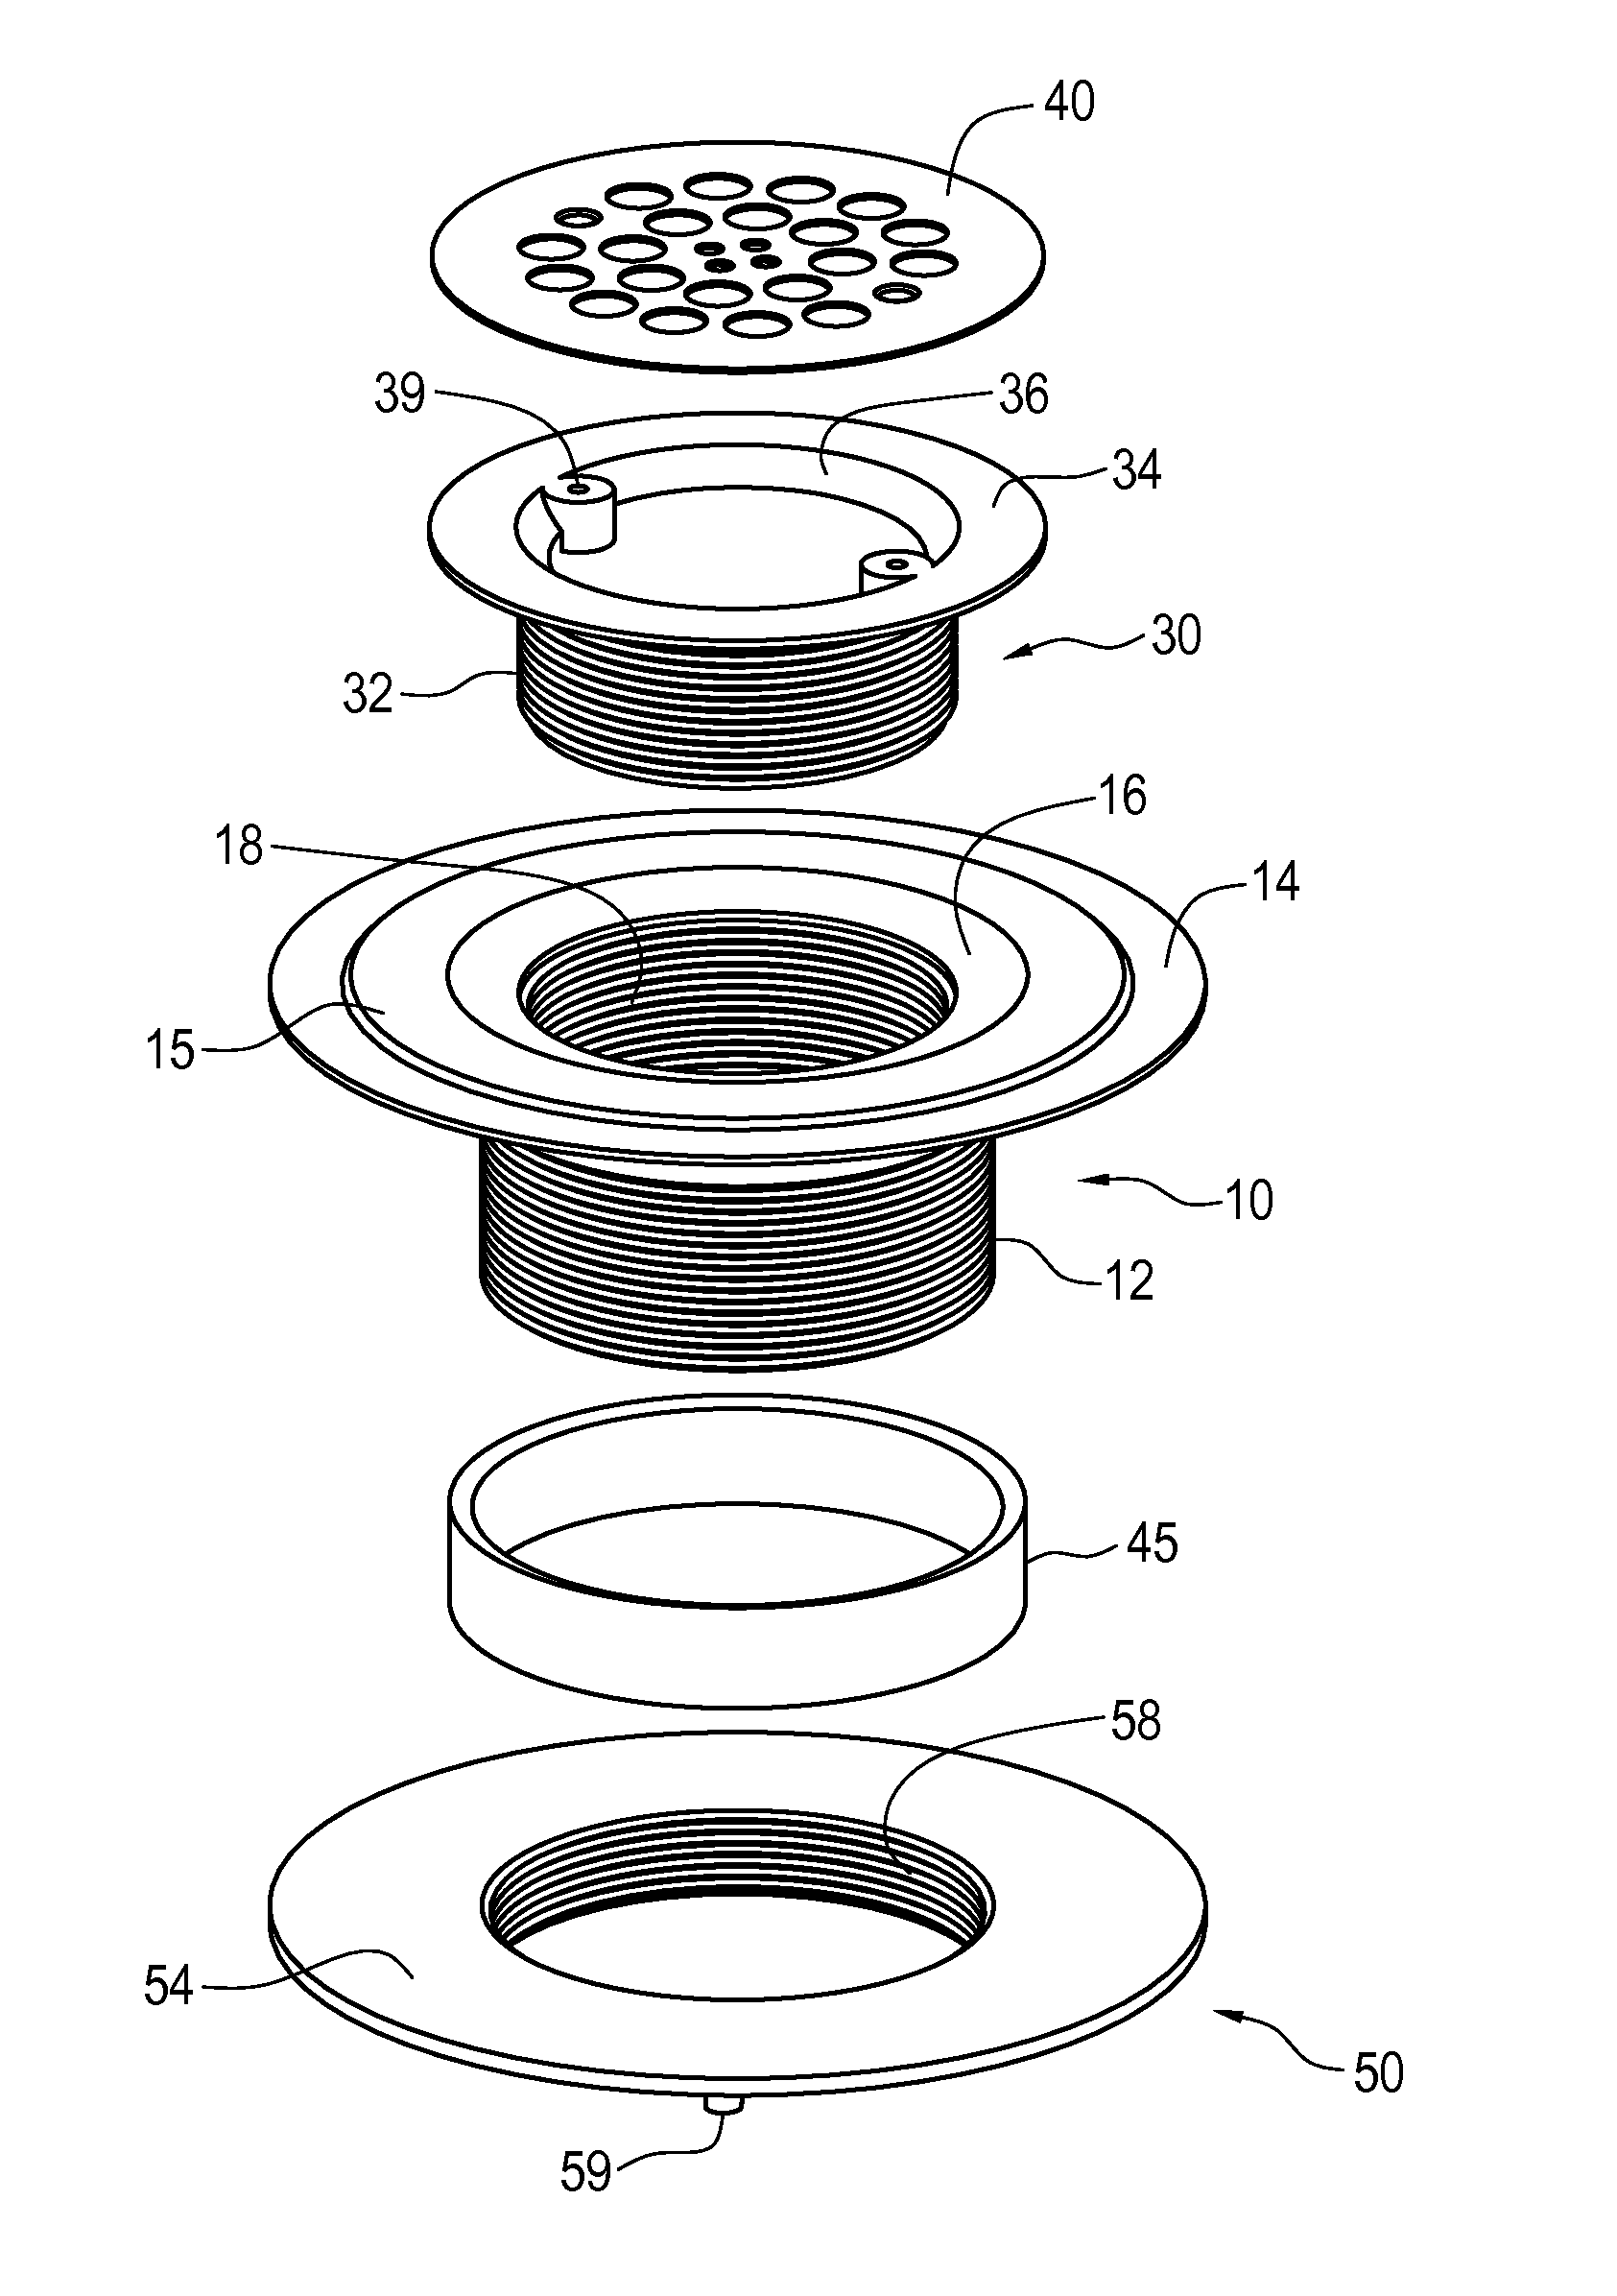 Compression drain with adjustable-height grate